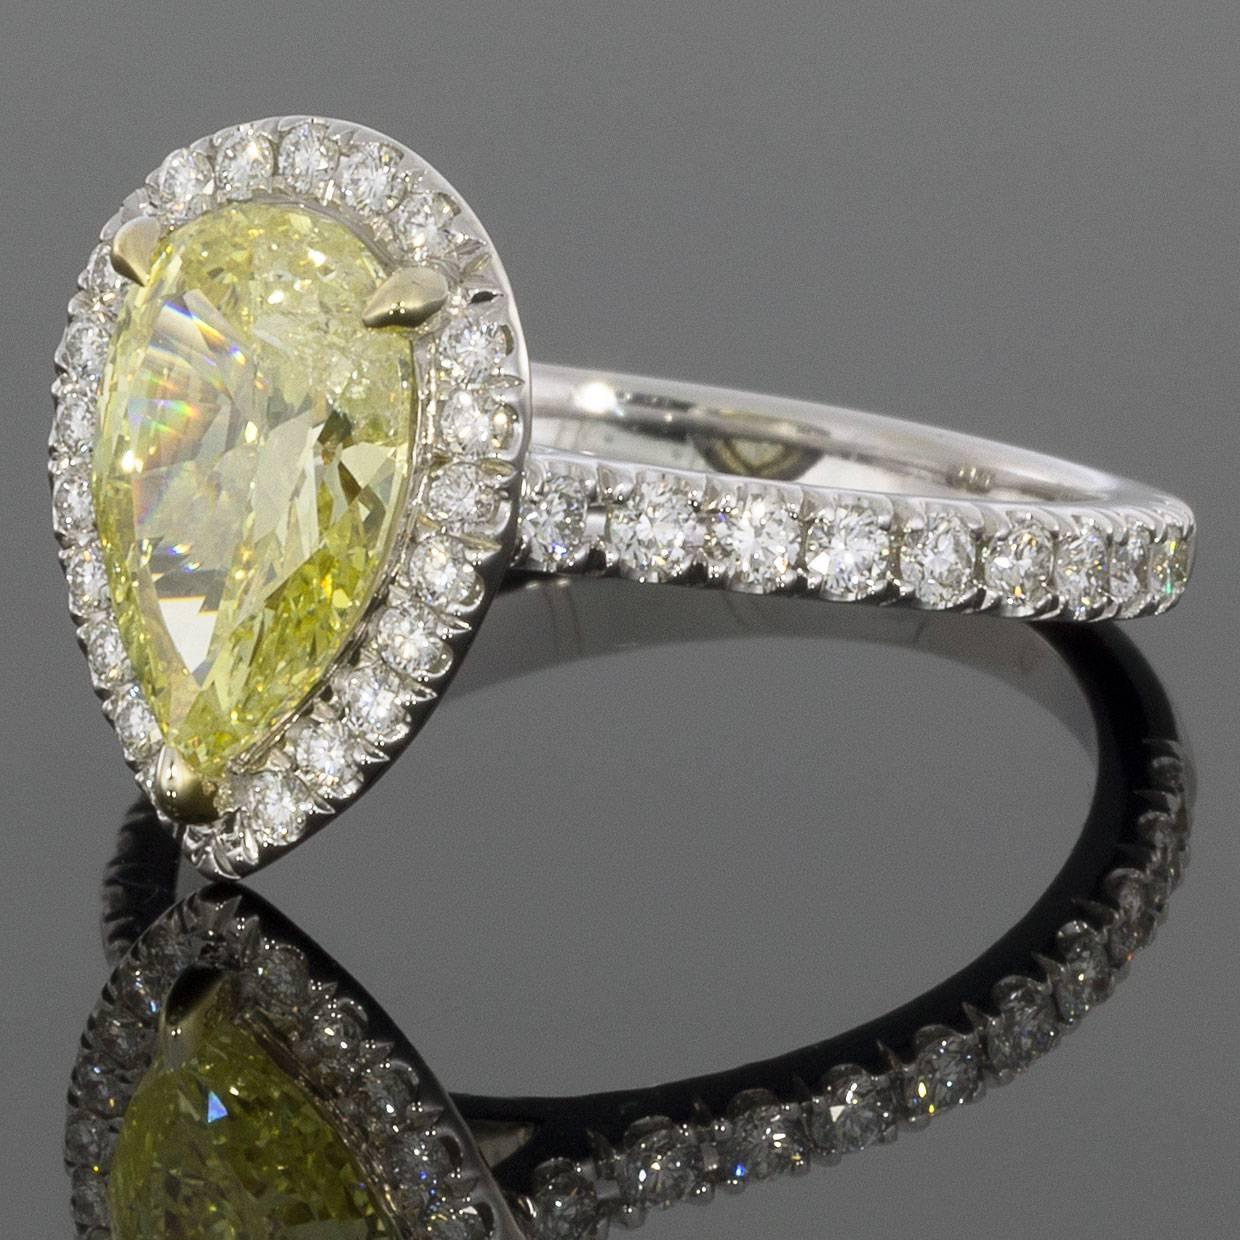 This gorgeous halo engagement ring features a stunning 1.56 carat fancy intense yellow, pear center diamond that is prong set in a yellow gold head on a custom made ring. This center diamond grades as Fancy Intense Yellow in color and is very well